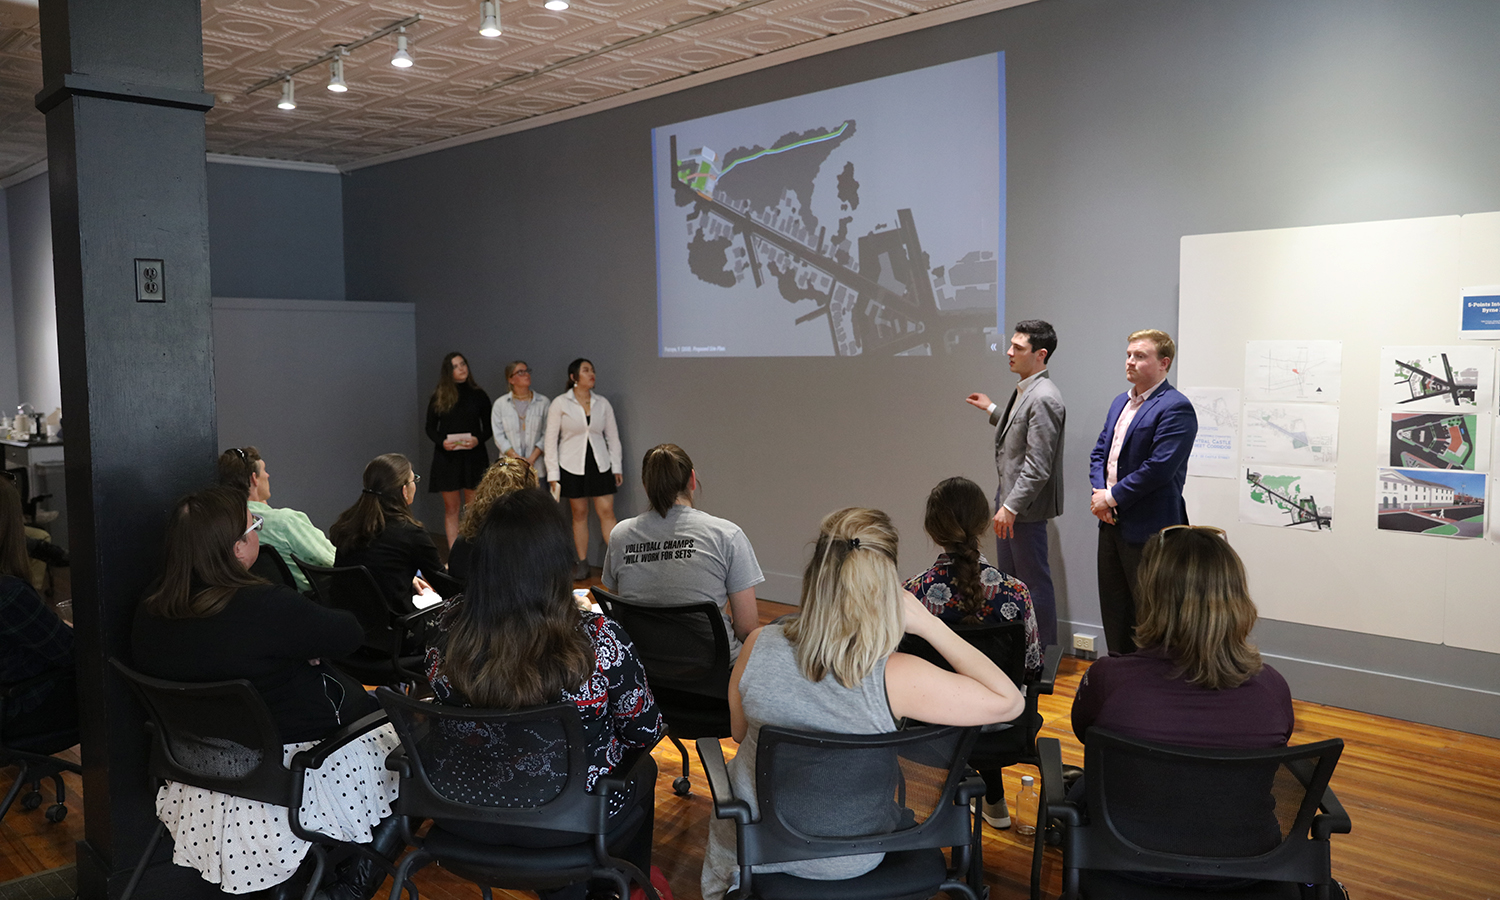 Students present a sustainability plan for the Castle Creek area ofGeneva as part of their Sustainable Community Development Capstone in the Bozzuto Center for Entrepreneurship.